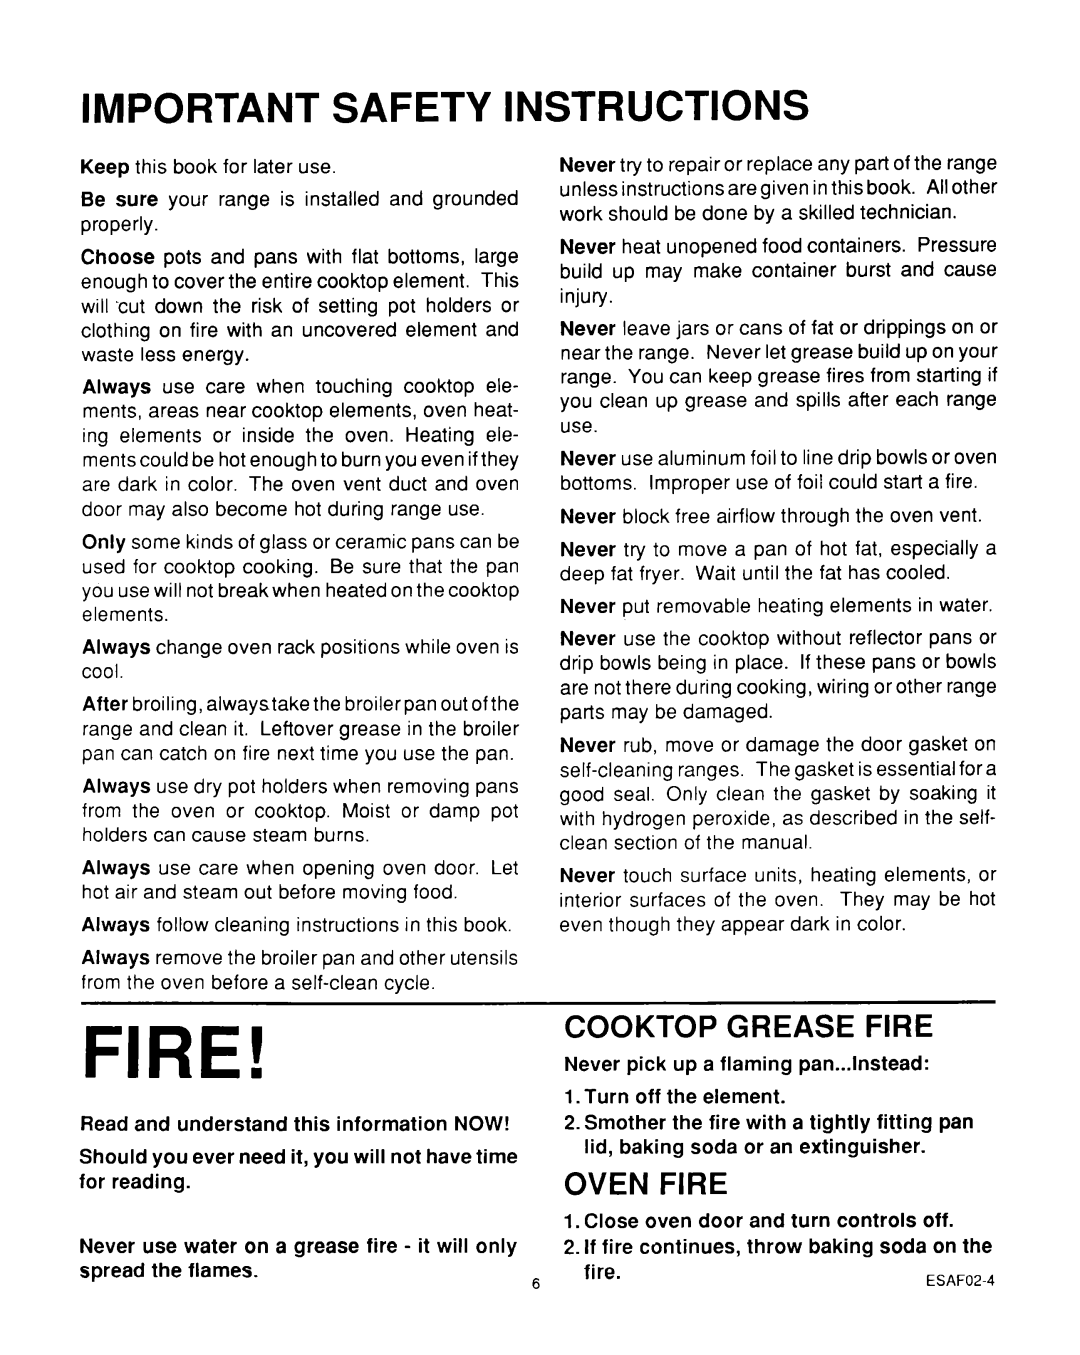 Roper D975 owner manual Important Safety Instructions, Cooktop Grease Fire, Oven Fire 